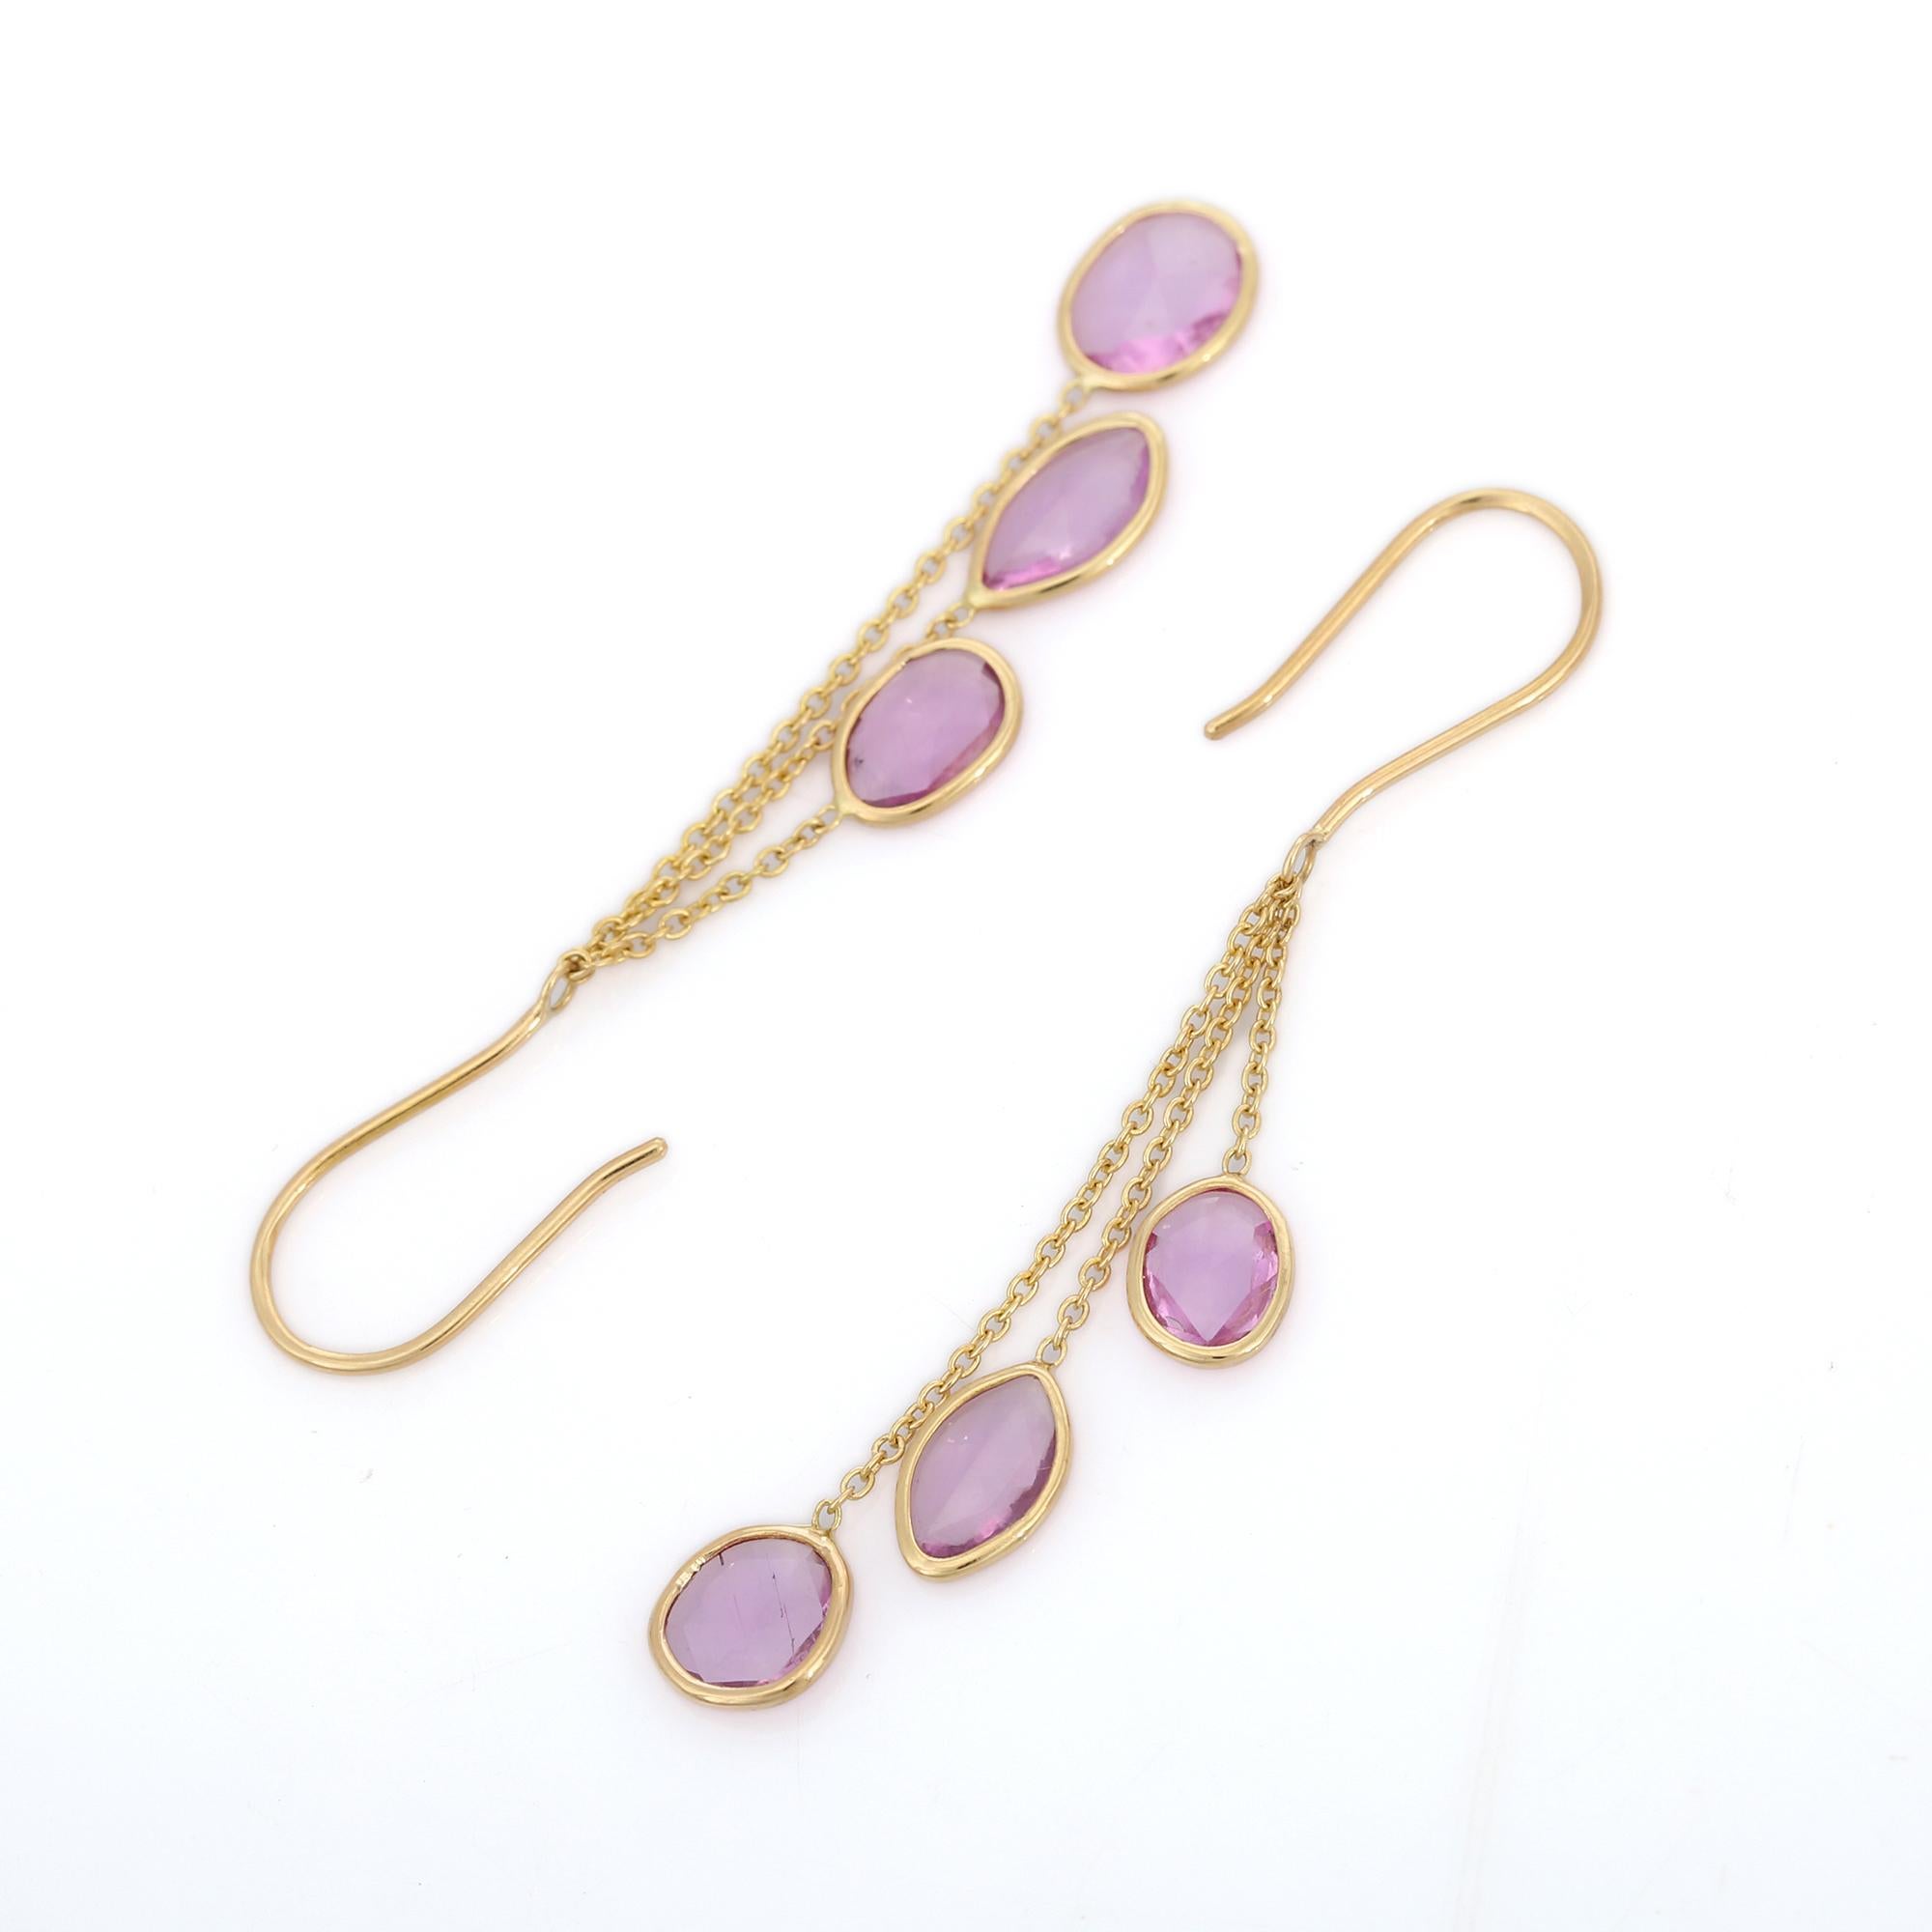 18K Yellow Gold Pink Sapphire Multi Layered Dangle earrings to make a statement with your look. These earrings create a sparkling, luxurious look featuring uneven cut gemstone.
If you love to gravitate towards unique styles, this piece of jewelry is